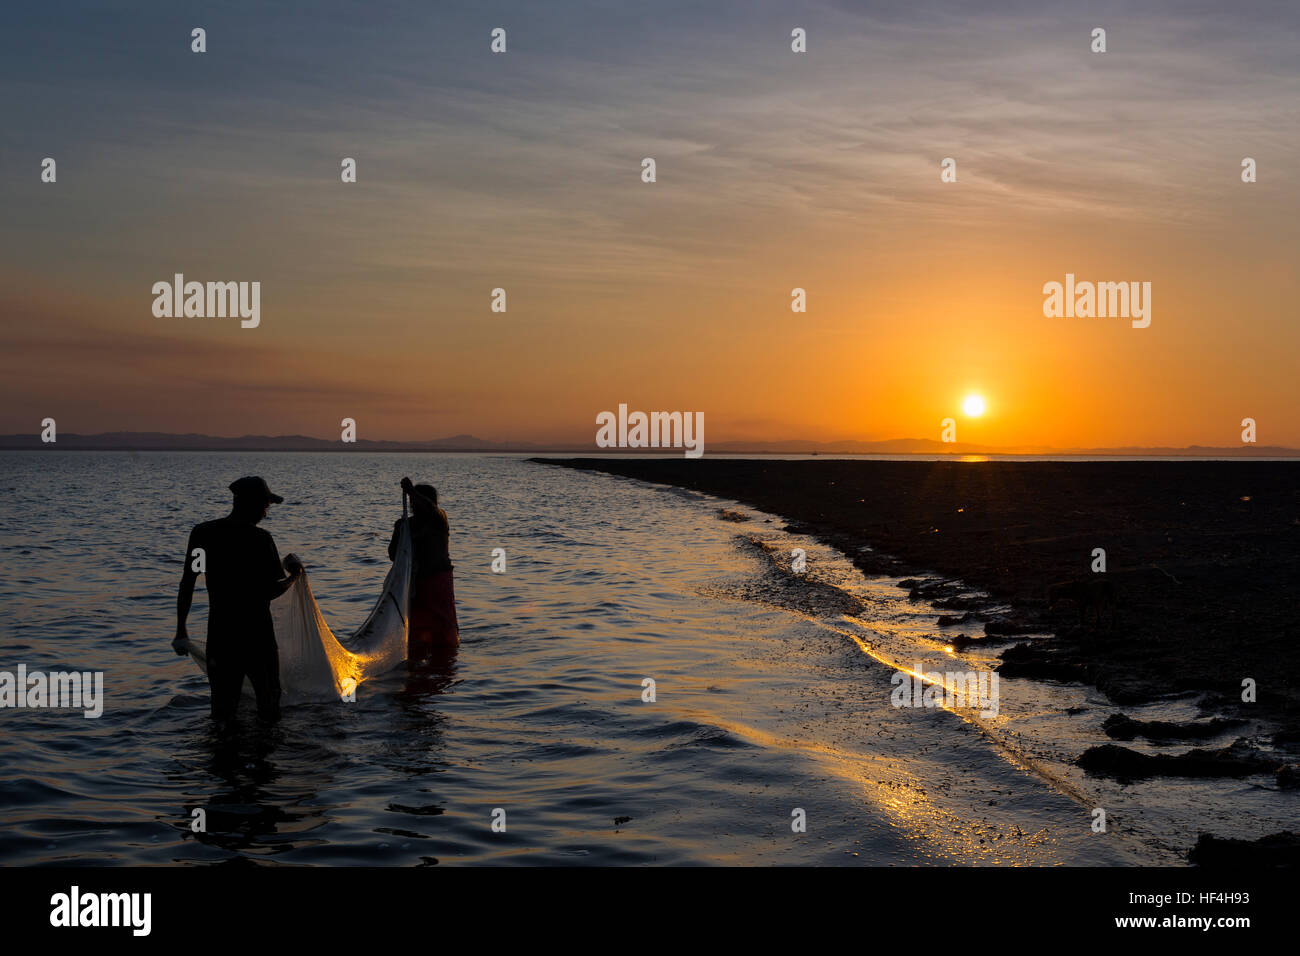 Ometepe Island, Nicaragua - April 7, 2014: Two fisherman fishing in the shores of the Ometepe Island in Lake Nicaragua, Nicaragua, at sunset Stock Photo